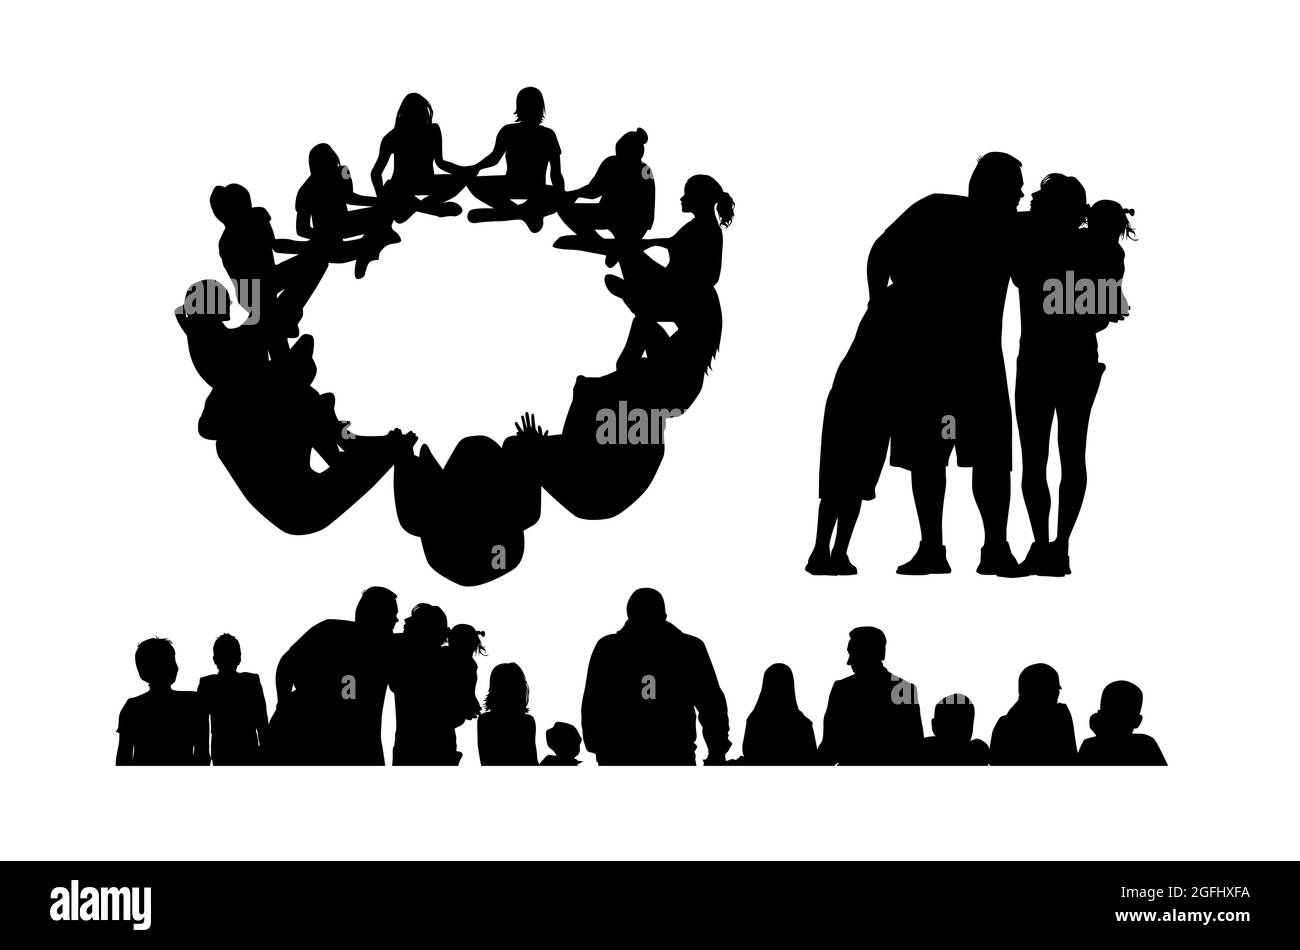 A group of people silhouette. People are sitting in a circle. Vector illustration Stock Vector